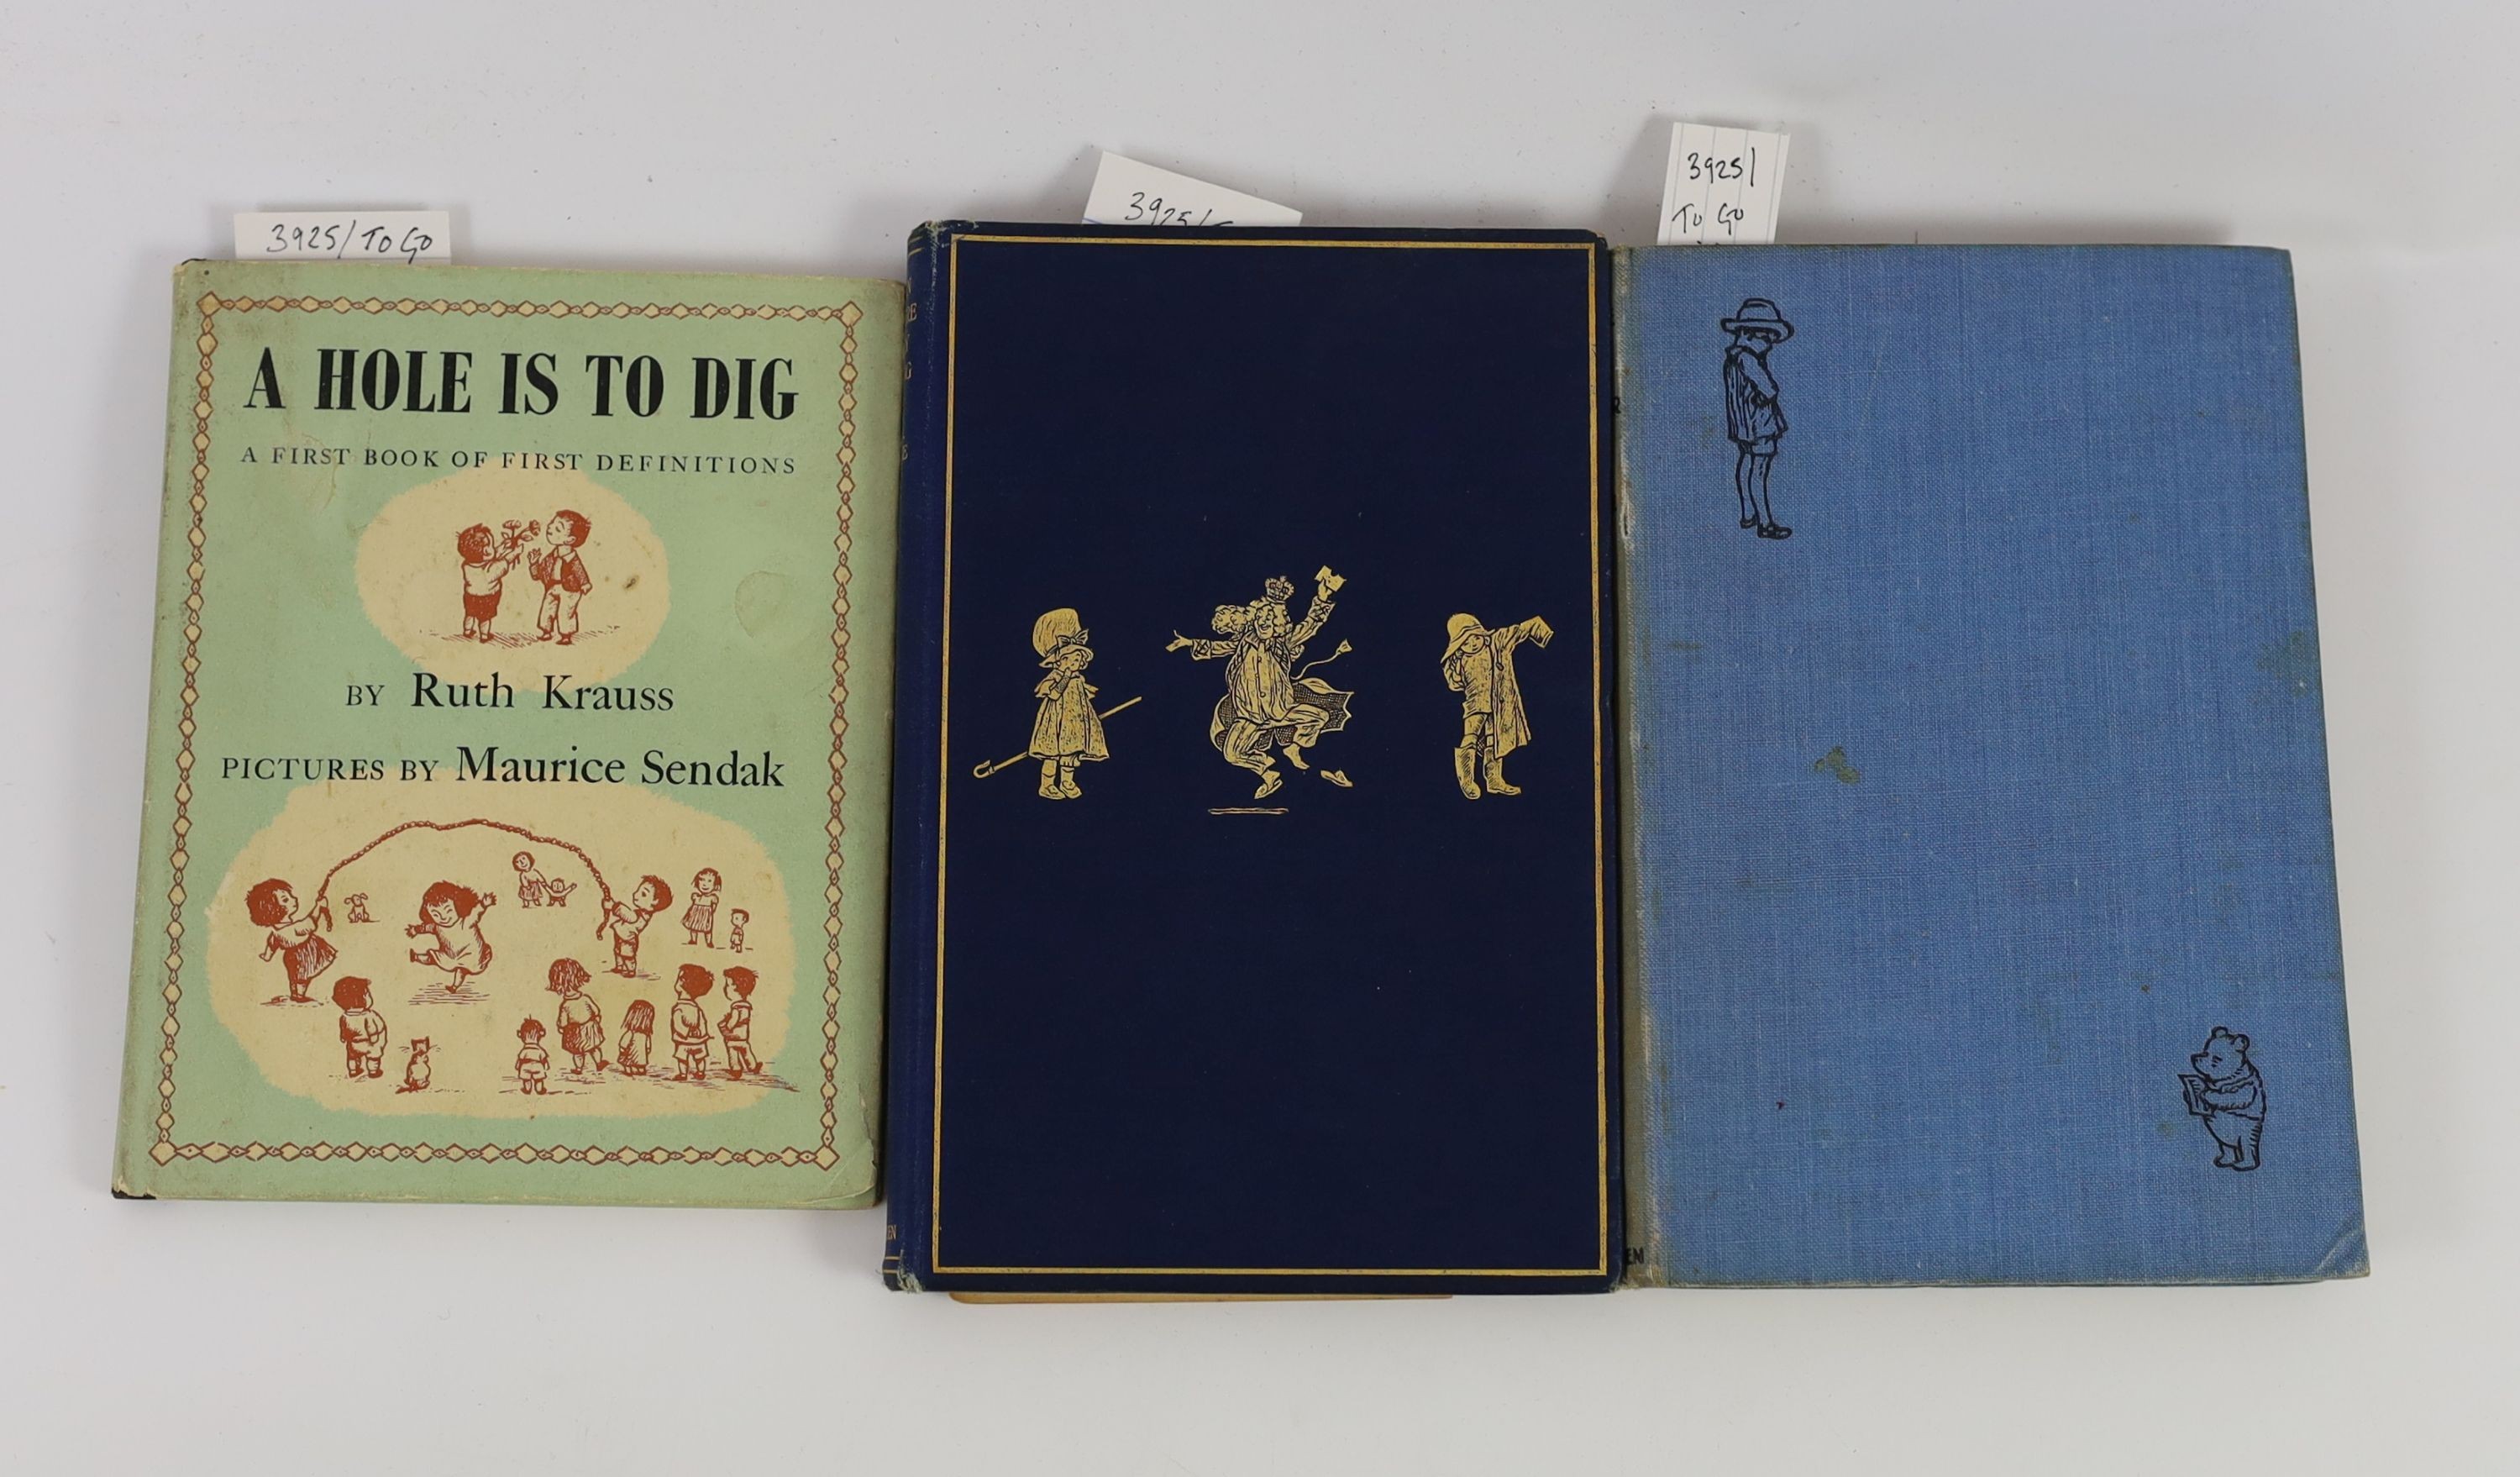 Krauss, Ruth - A Hole is to Dig - 1st British ed. - Hamish Hamilton, London, 1963., Milne, A. A. - When We Were Very Young - Methuen & Co. Ltd, London, 1924., Milne, A. A. - The House at Pooh Corner - Methuen & Co. Ltd,